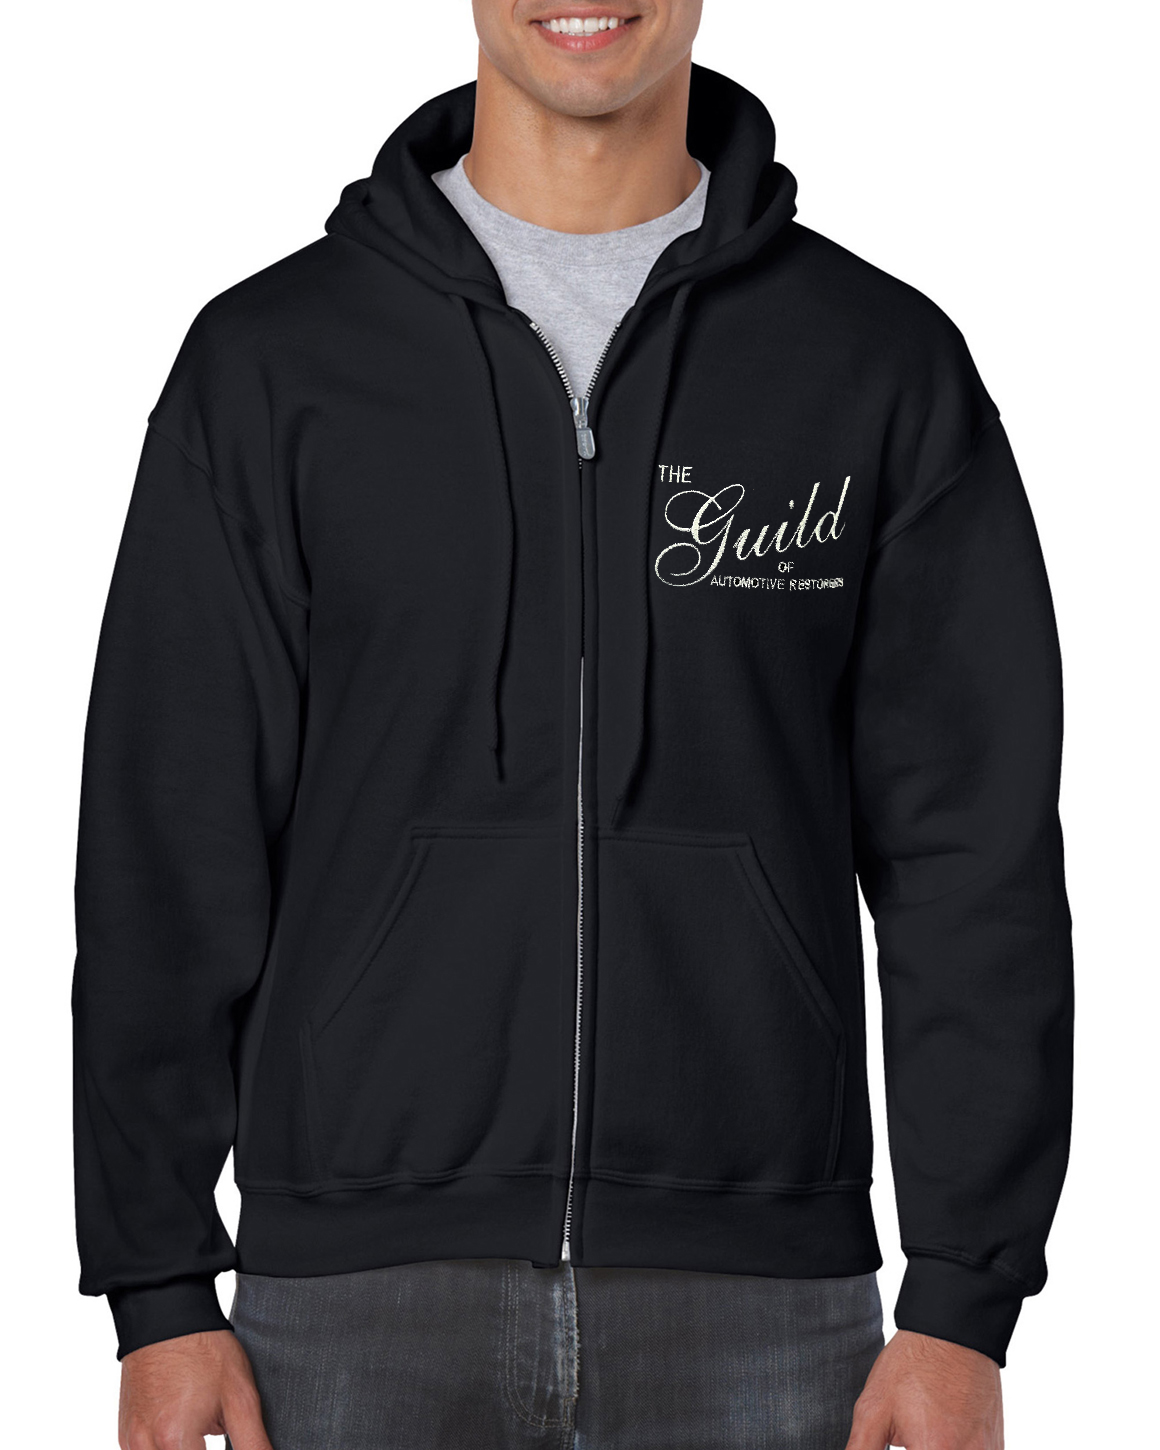 Guild Embroidered Logo Classic Full Zip Hooded Sweatshirt